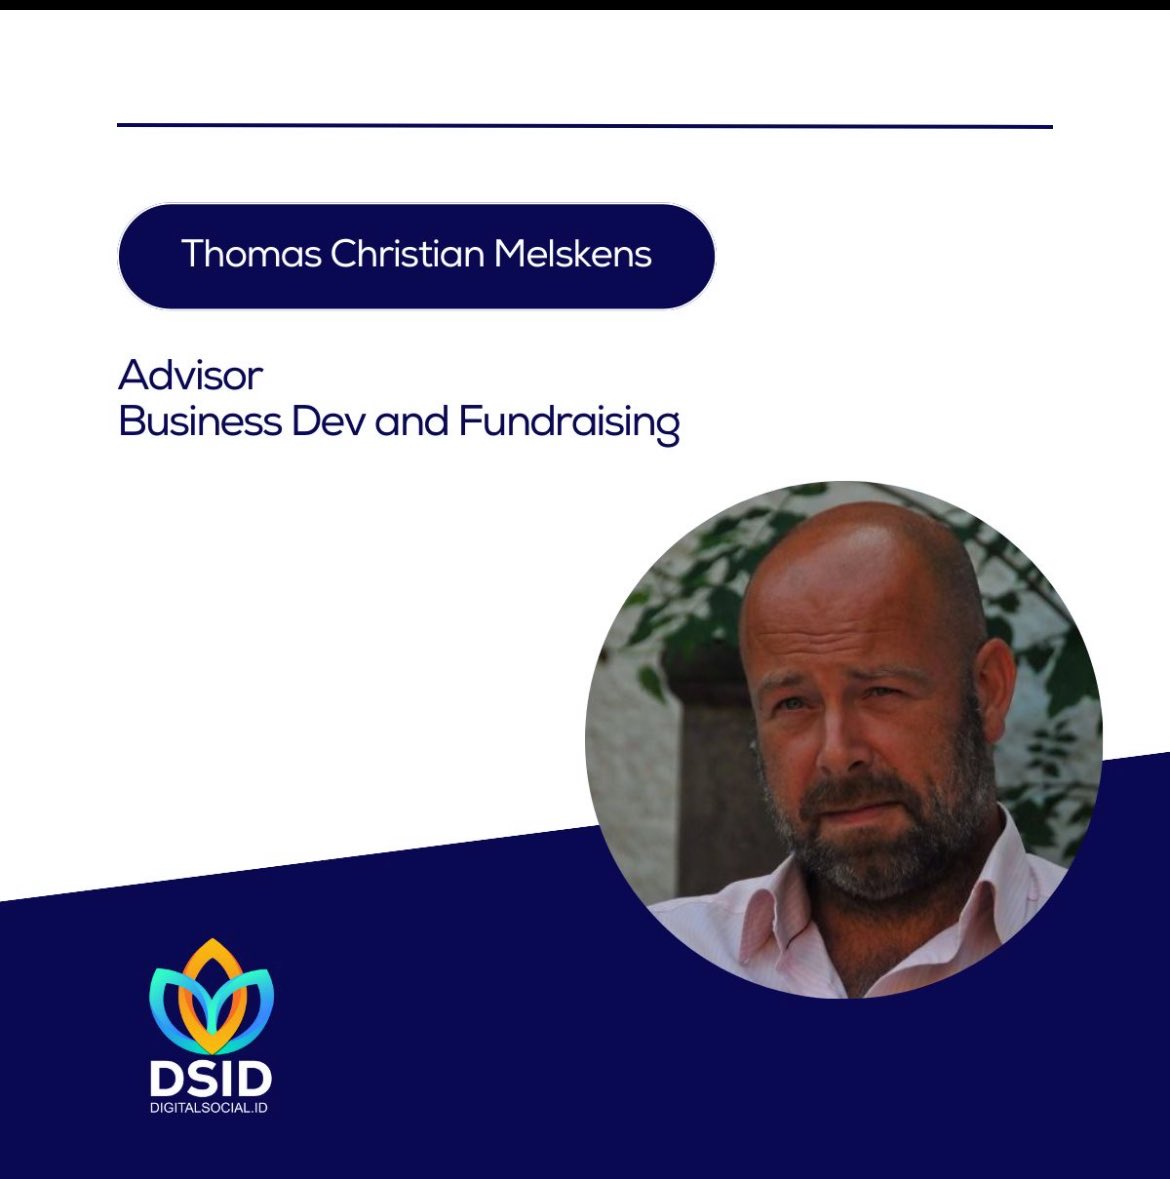 Exciting news at DSID! 🚀 

Meet one of our incredible expert advisors, Thomas Christian Melskens 

Grateful to have you on our rock star team! 🕺 #ExpertAdvisor #Teamwork